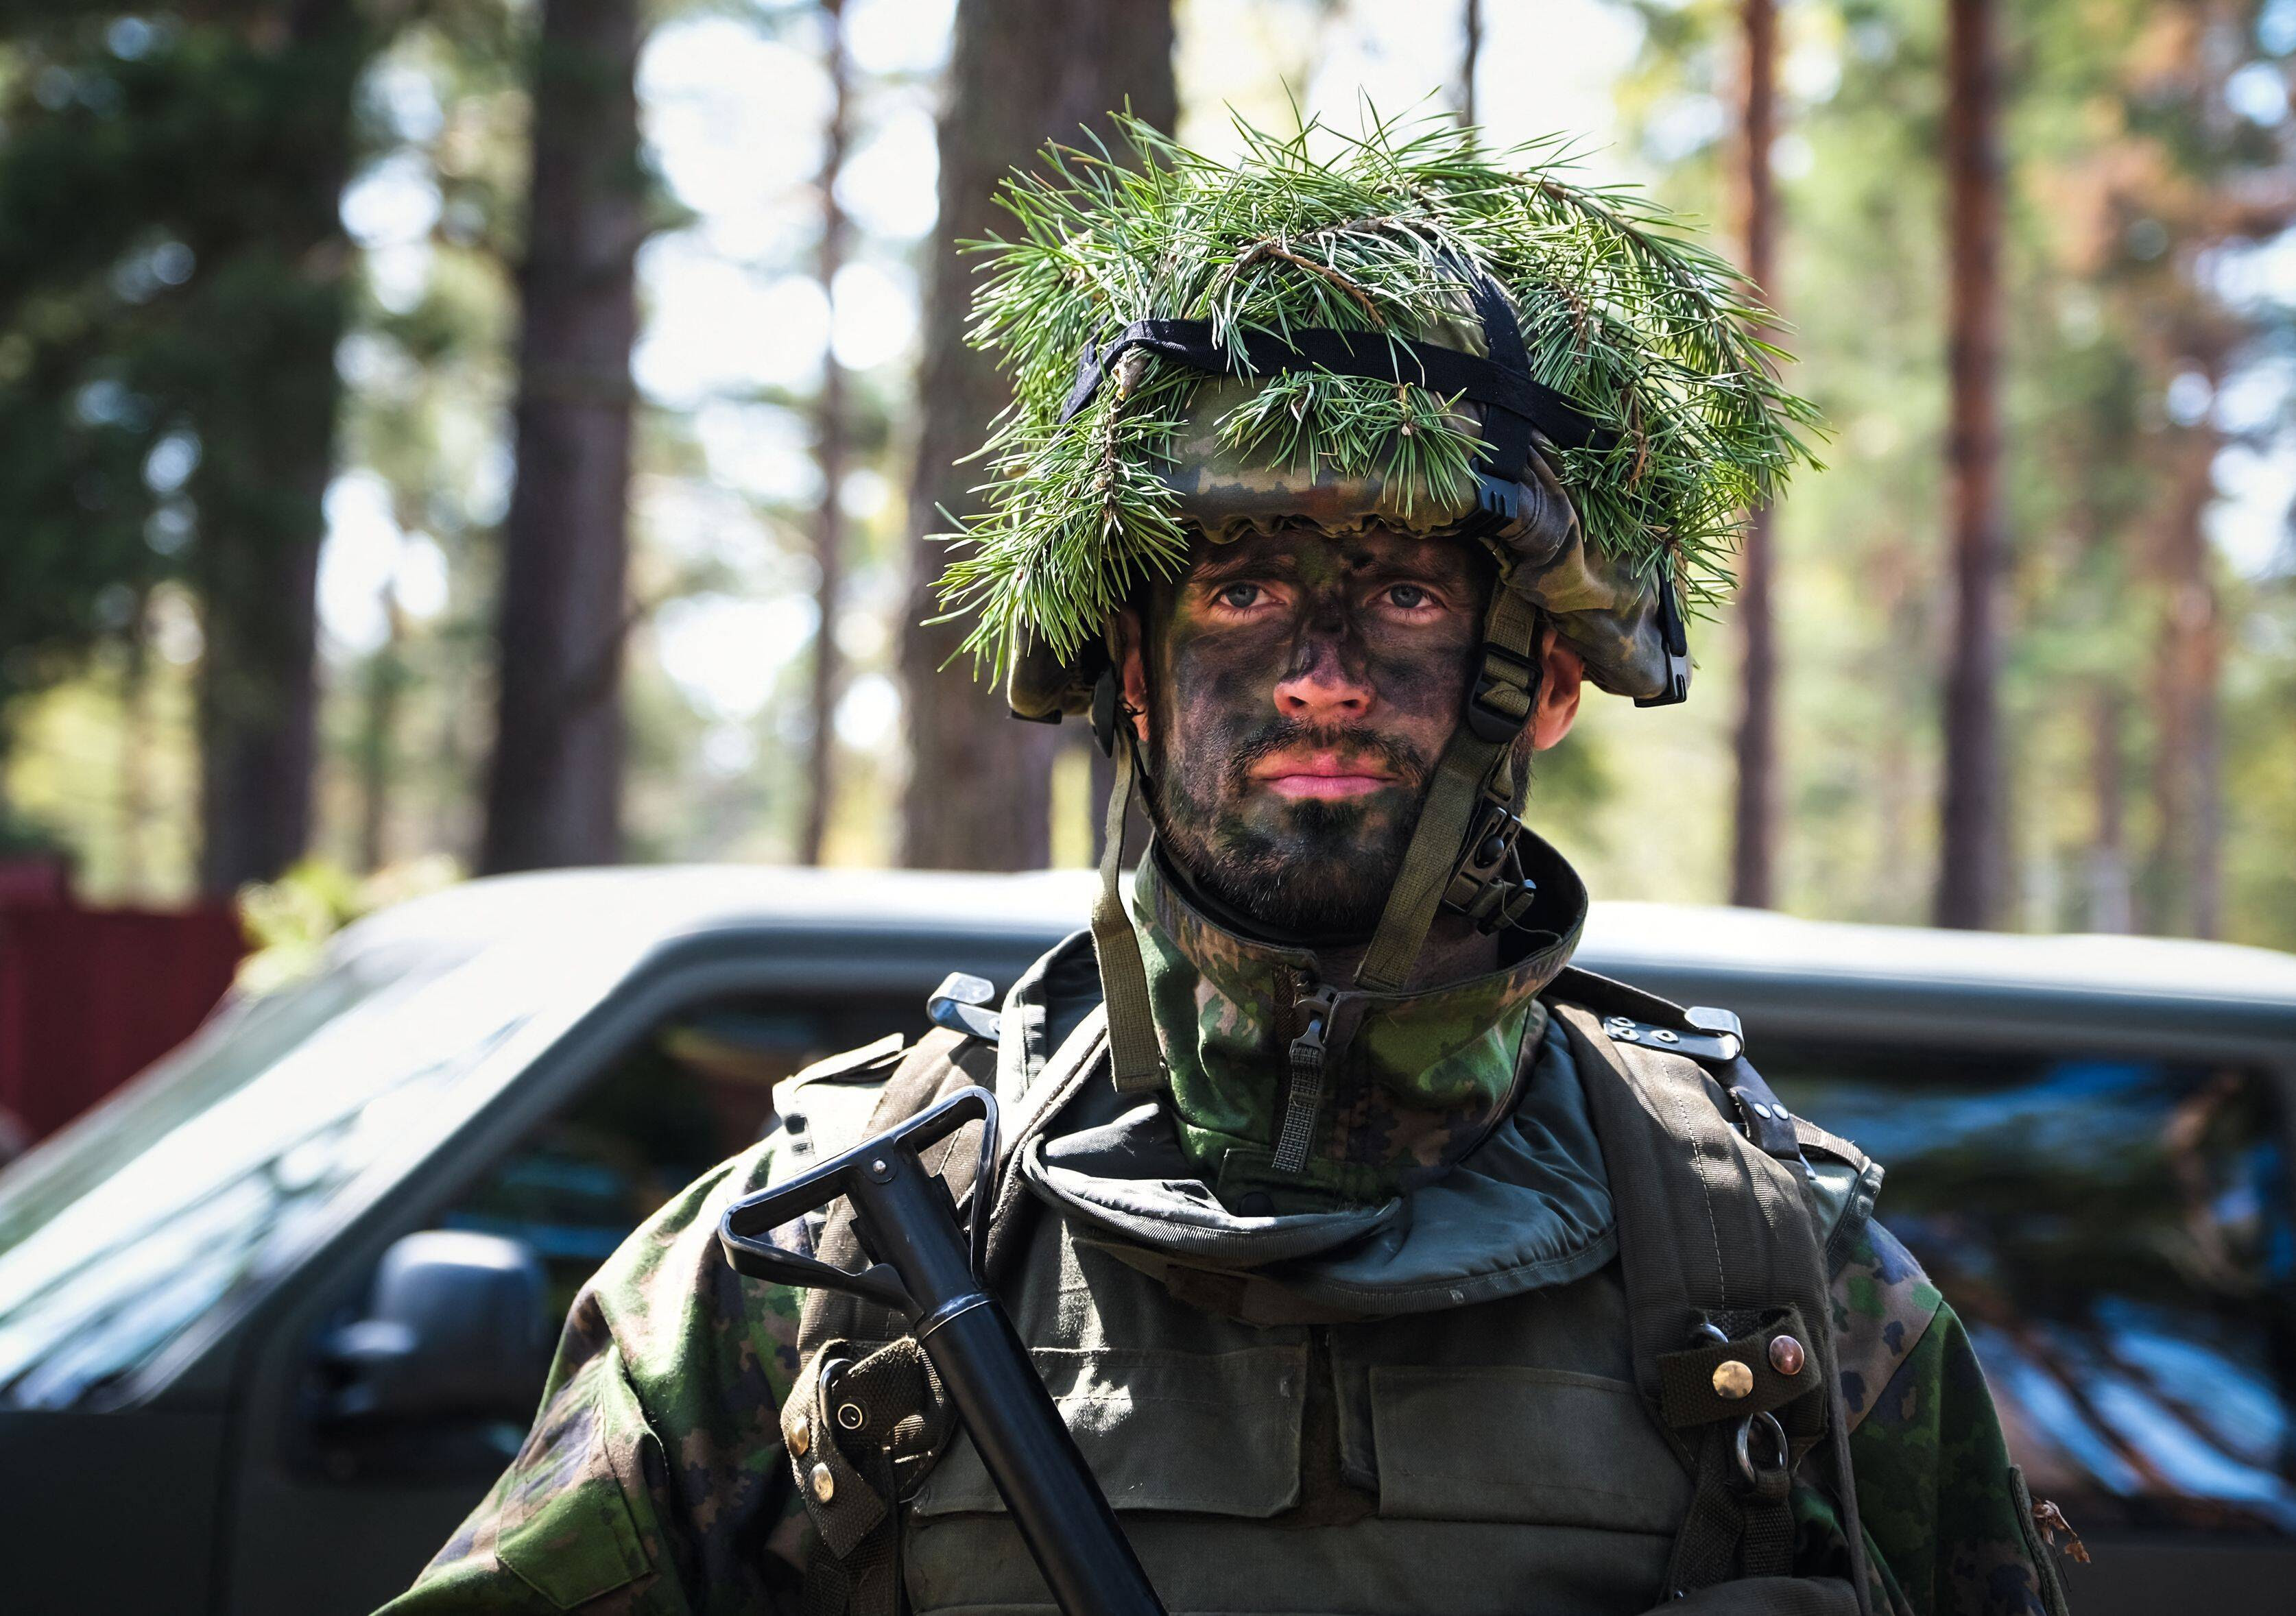 Members of the MPK, the National Defense Training Association of Finland, attend an exercise at the Santahamina military base in Helsinki on May 14. (Alessandro Rampazzo/AFP/Getty Images)